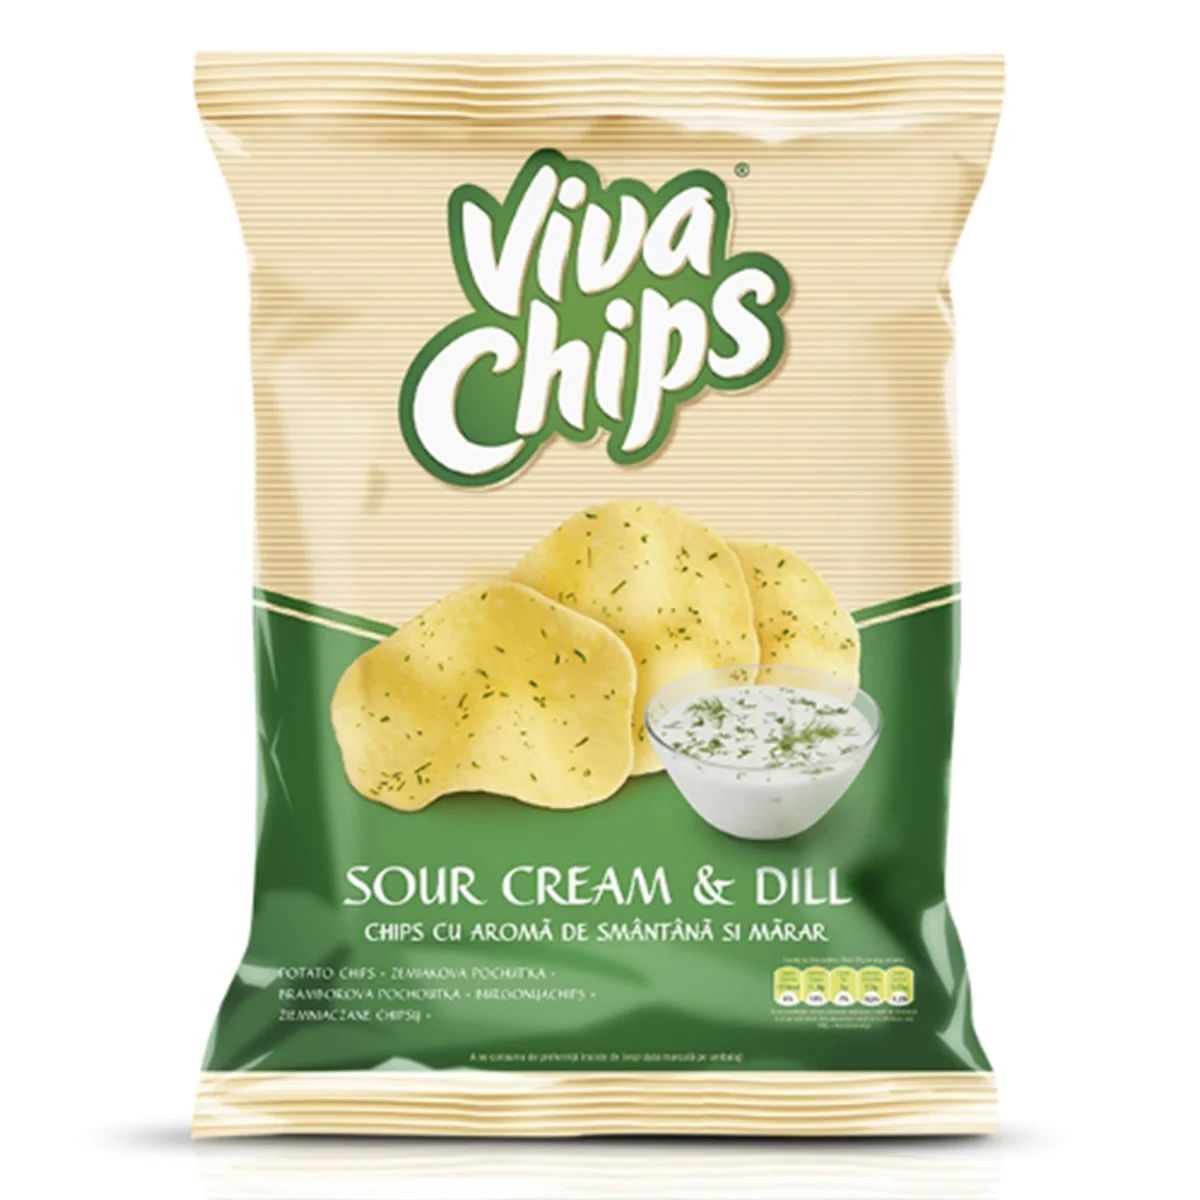 A bag of Viva Chips - Sour Cream & Dill Flavoured Crisps - 100g.